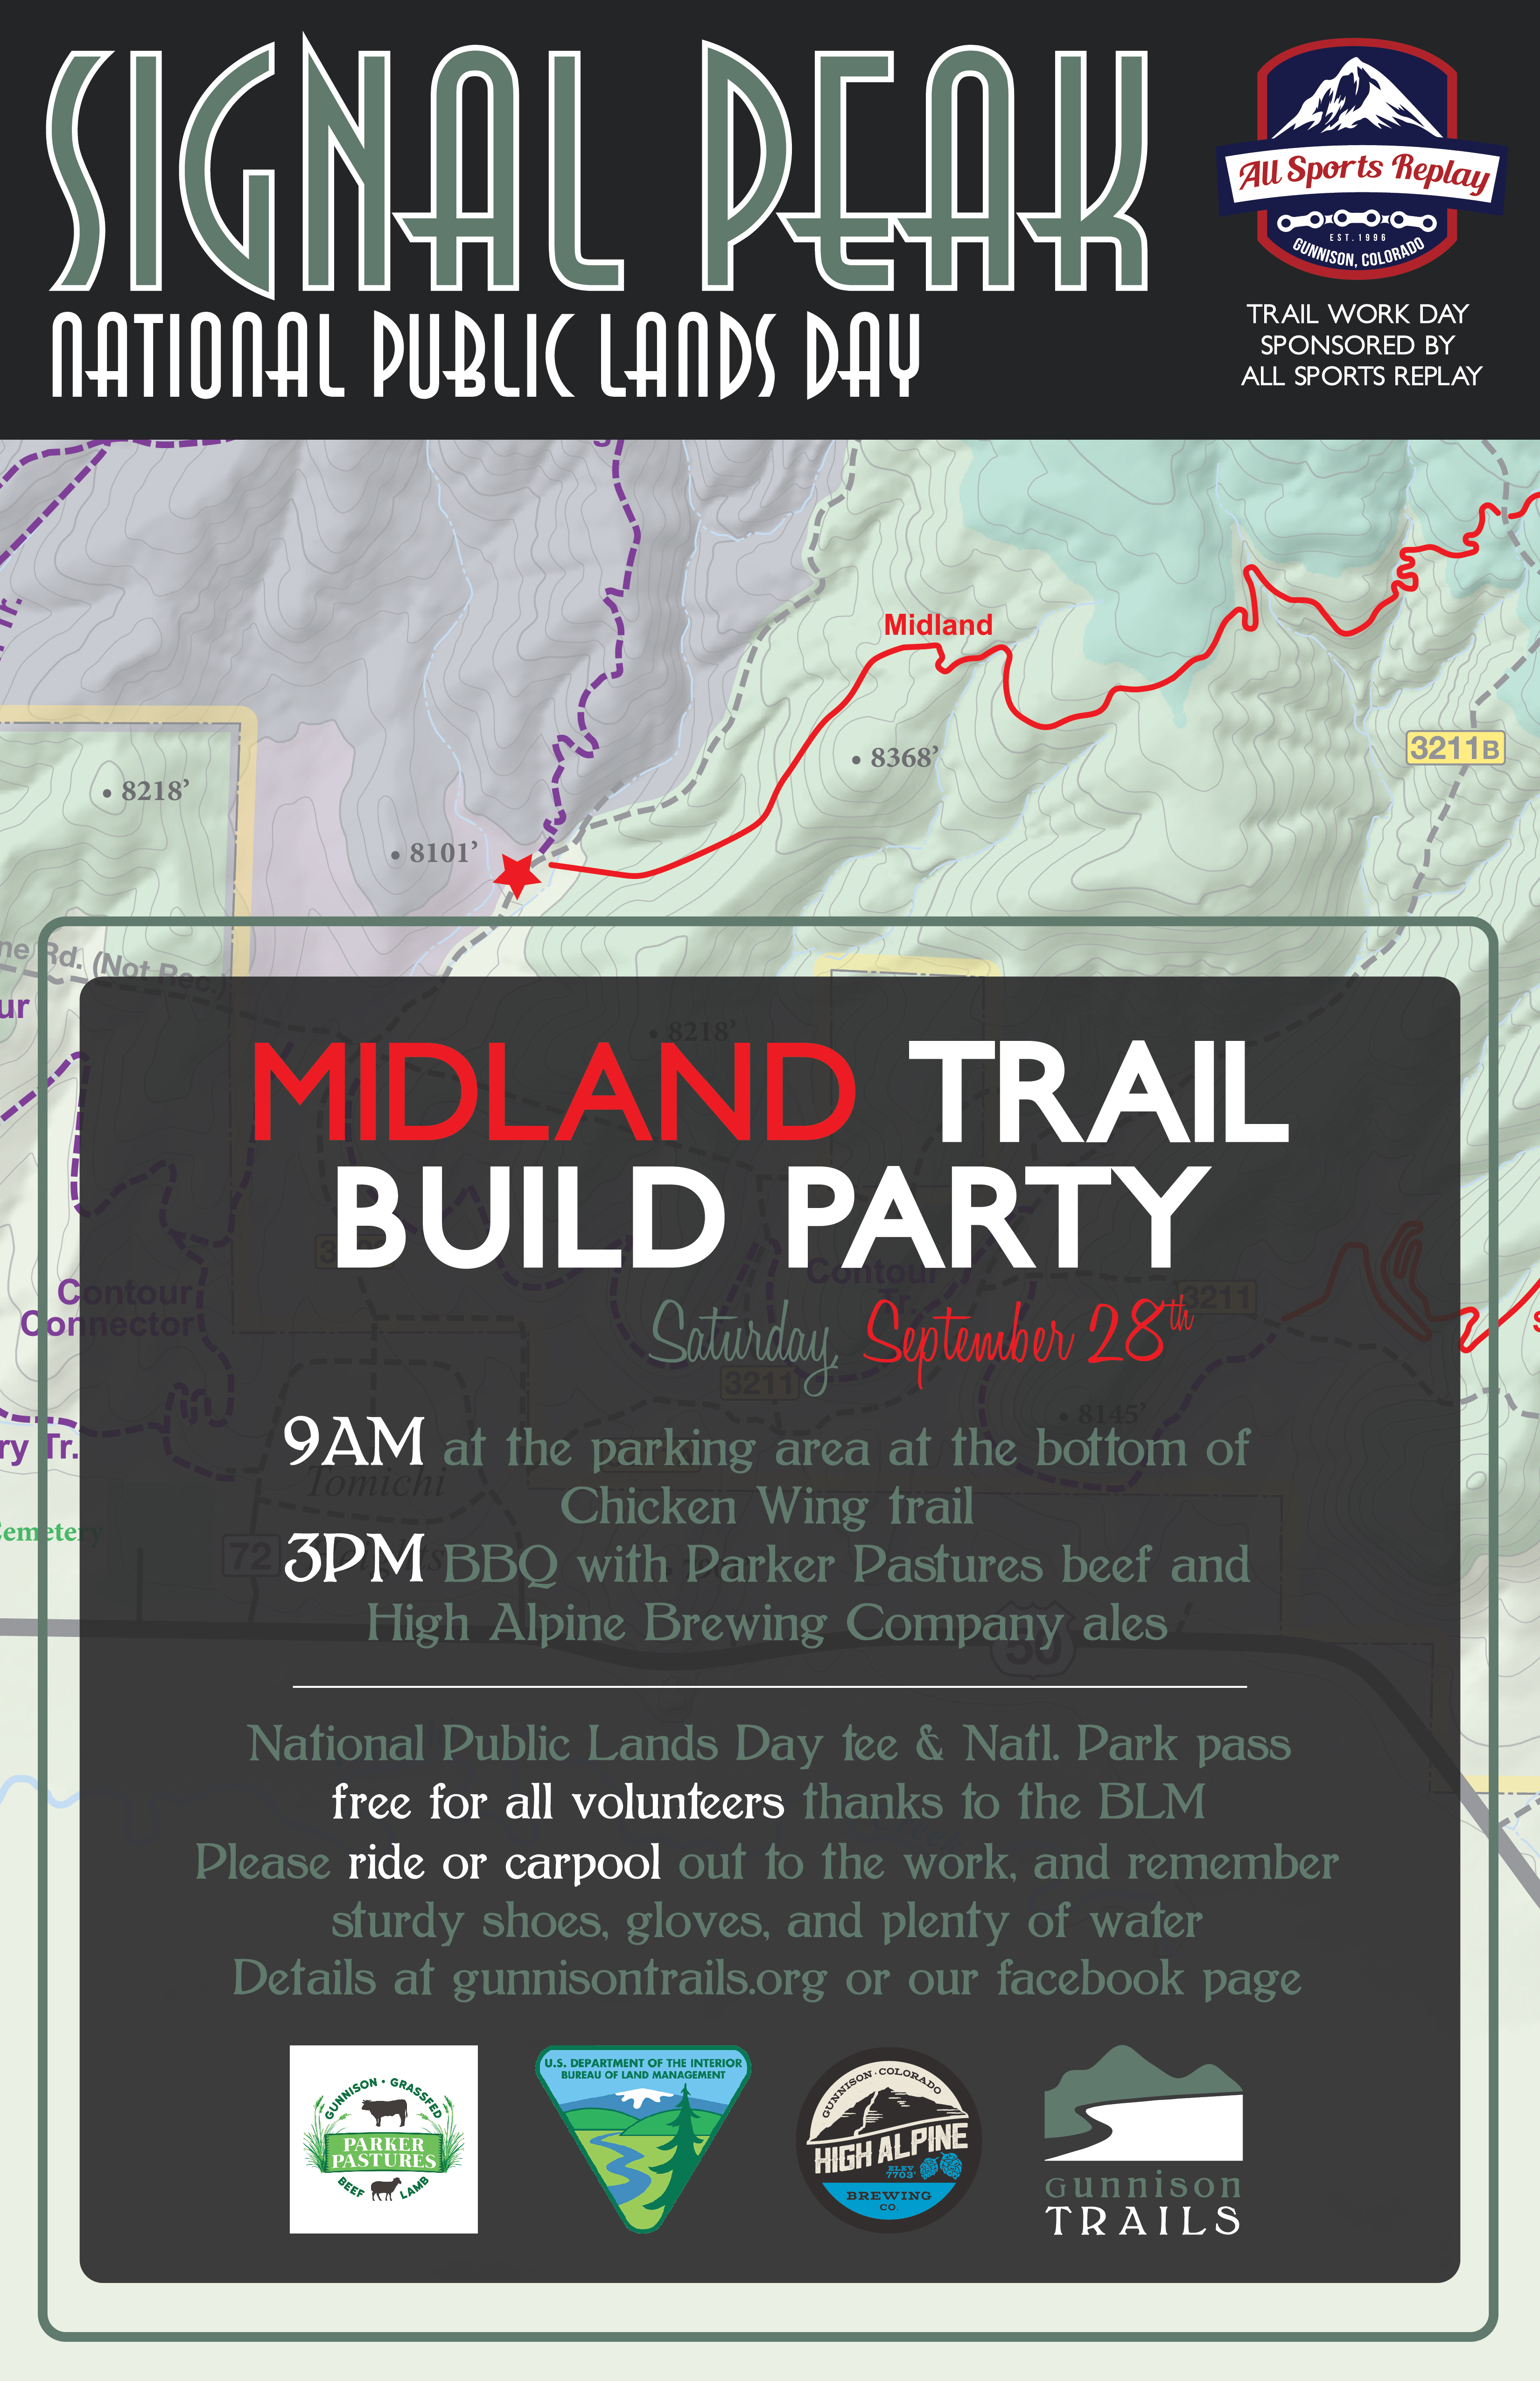 Saturday, September 28th – Midland Trail Build Party